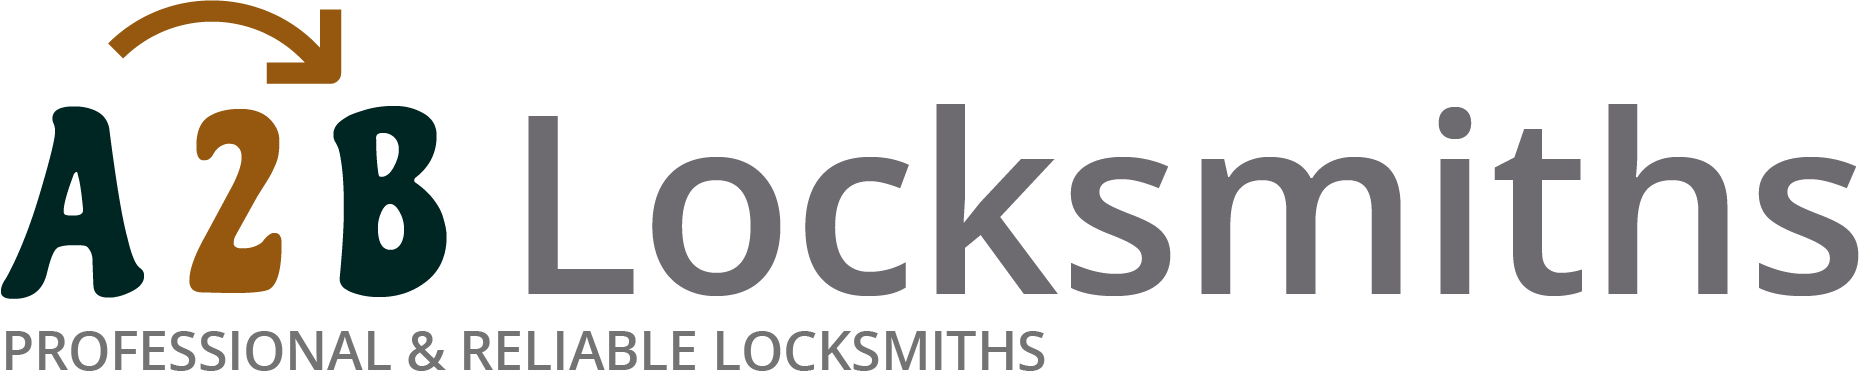 If you are locked out of house in Lichfield, our 24/7 local emergency locksmith services can help you.